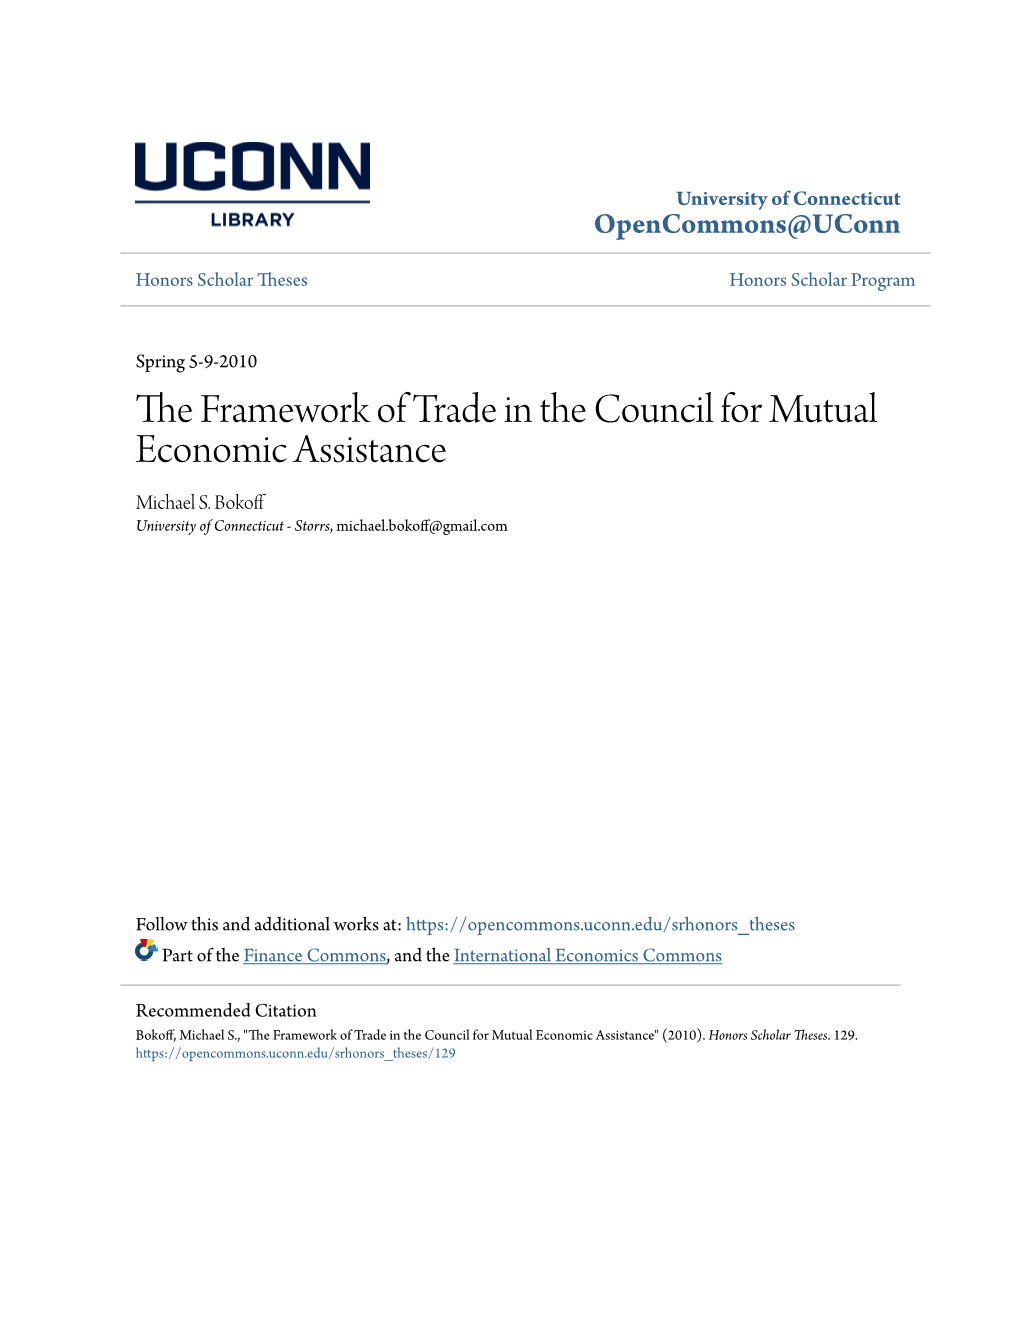 The Framework of Trade in the Council for Mutual Economic Assistance